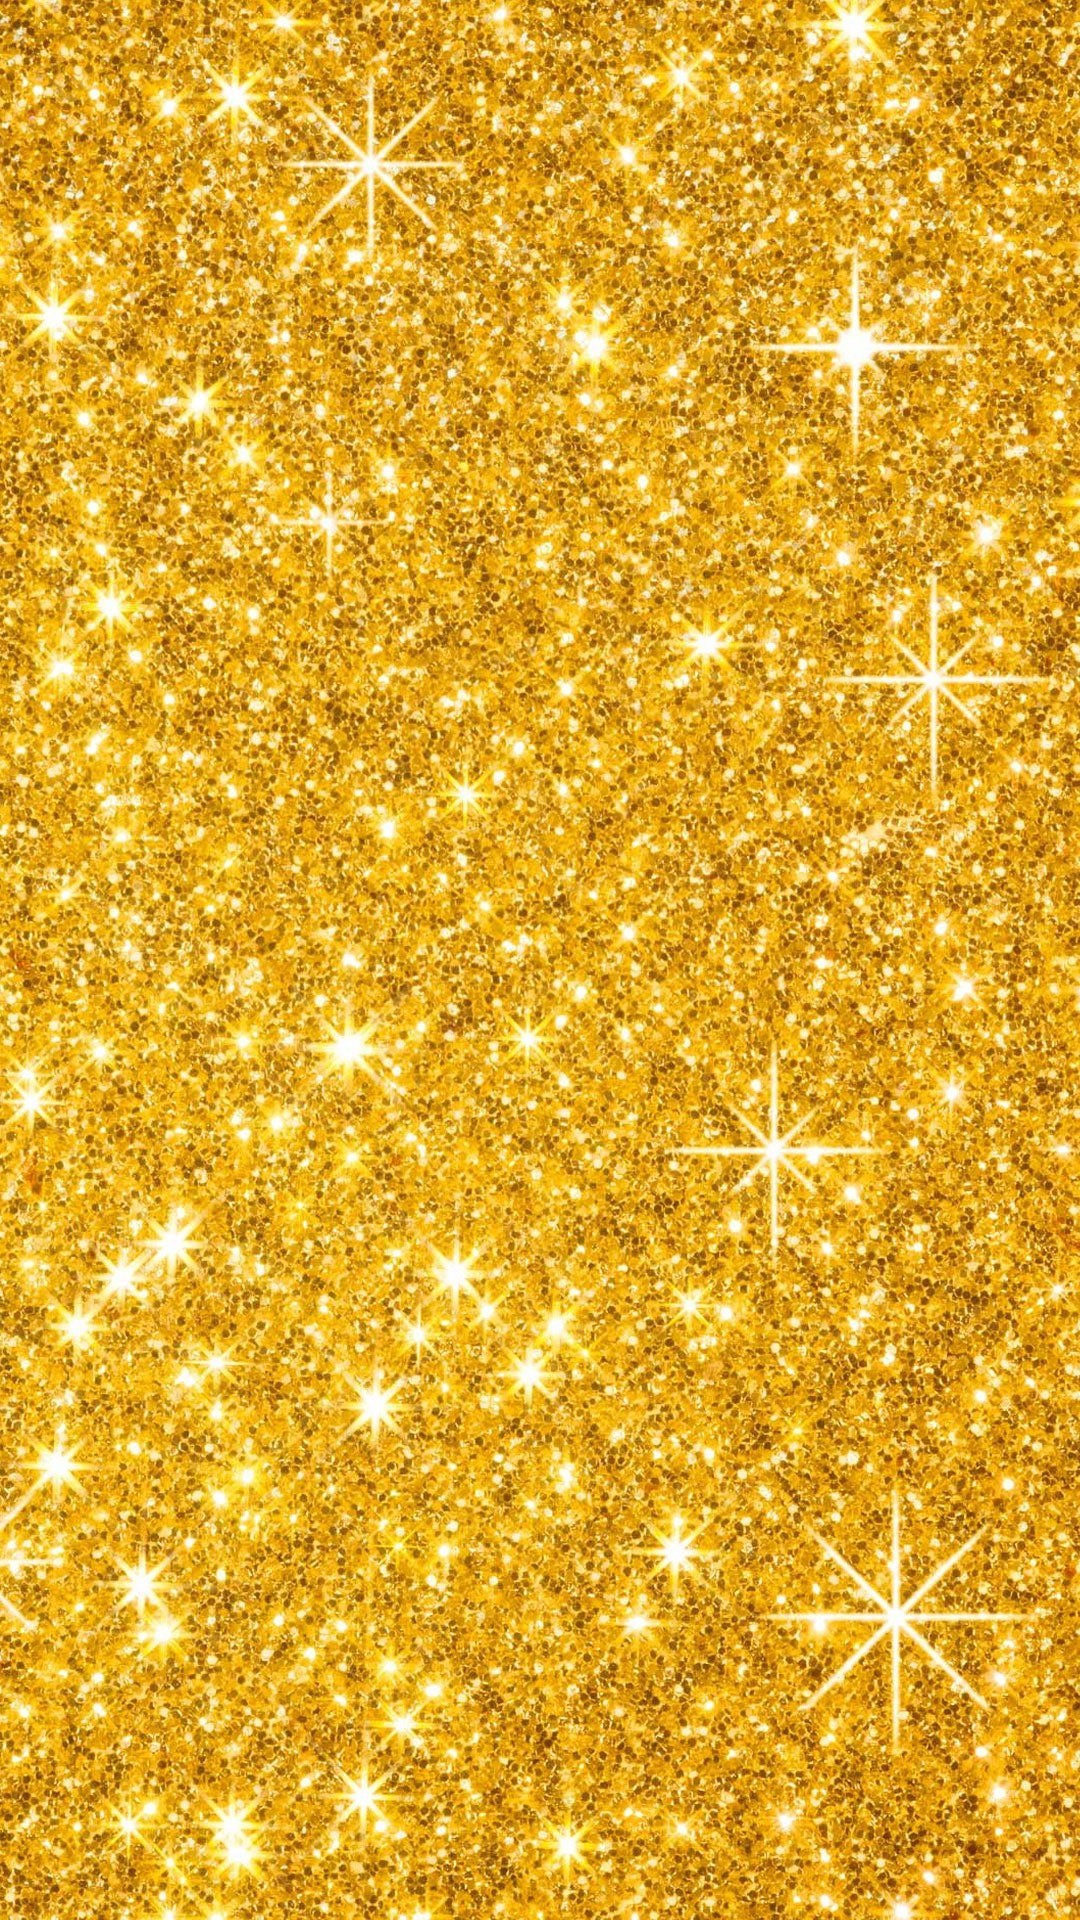 Gold Sparkle iPhone Wallpaper resolution 1080x1920